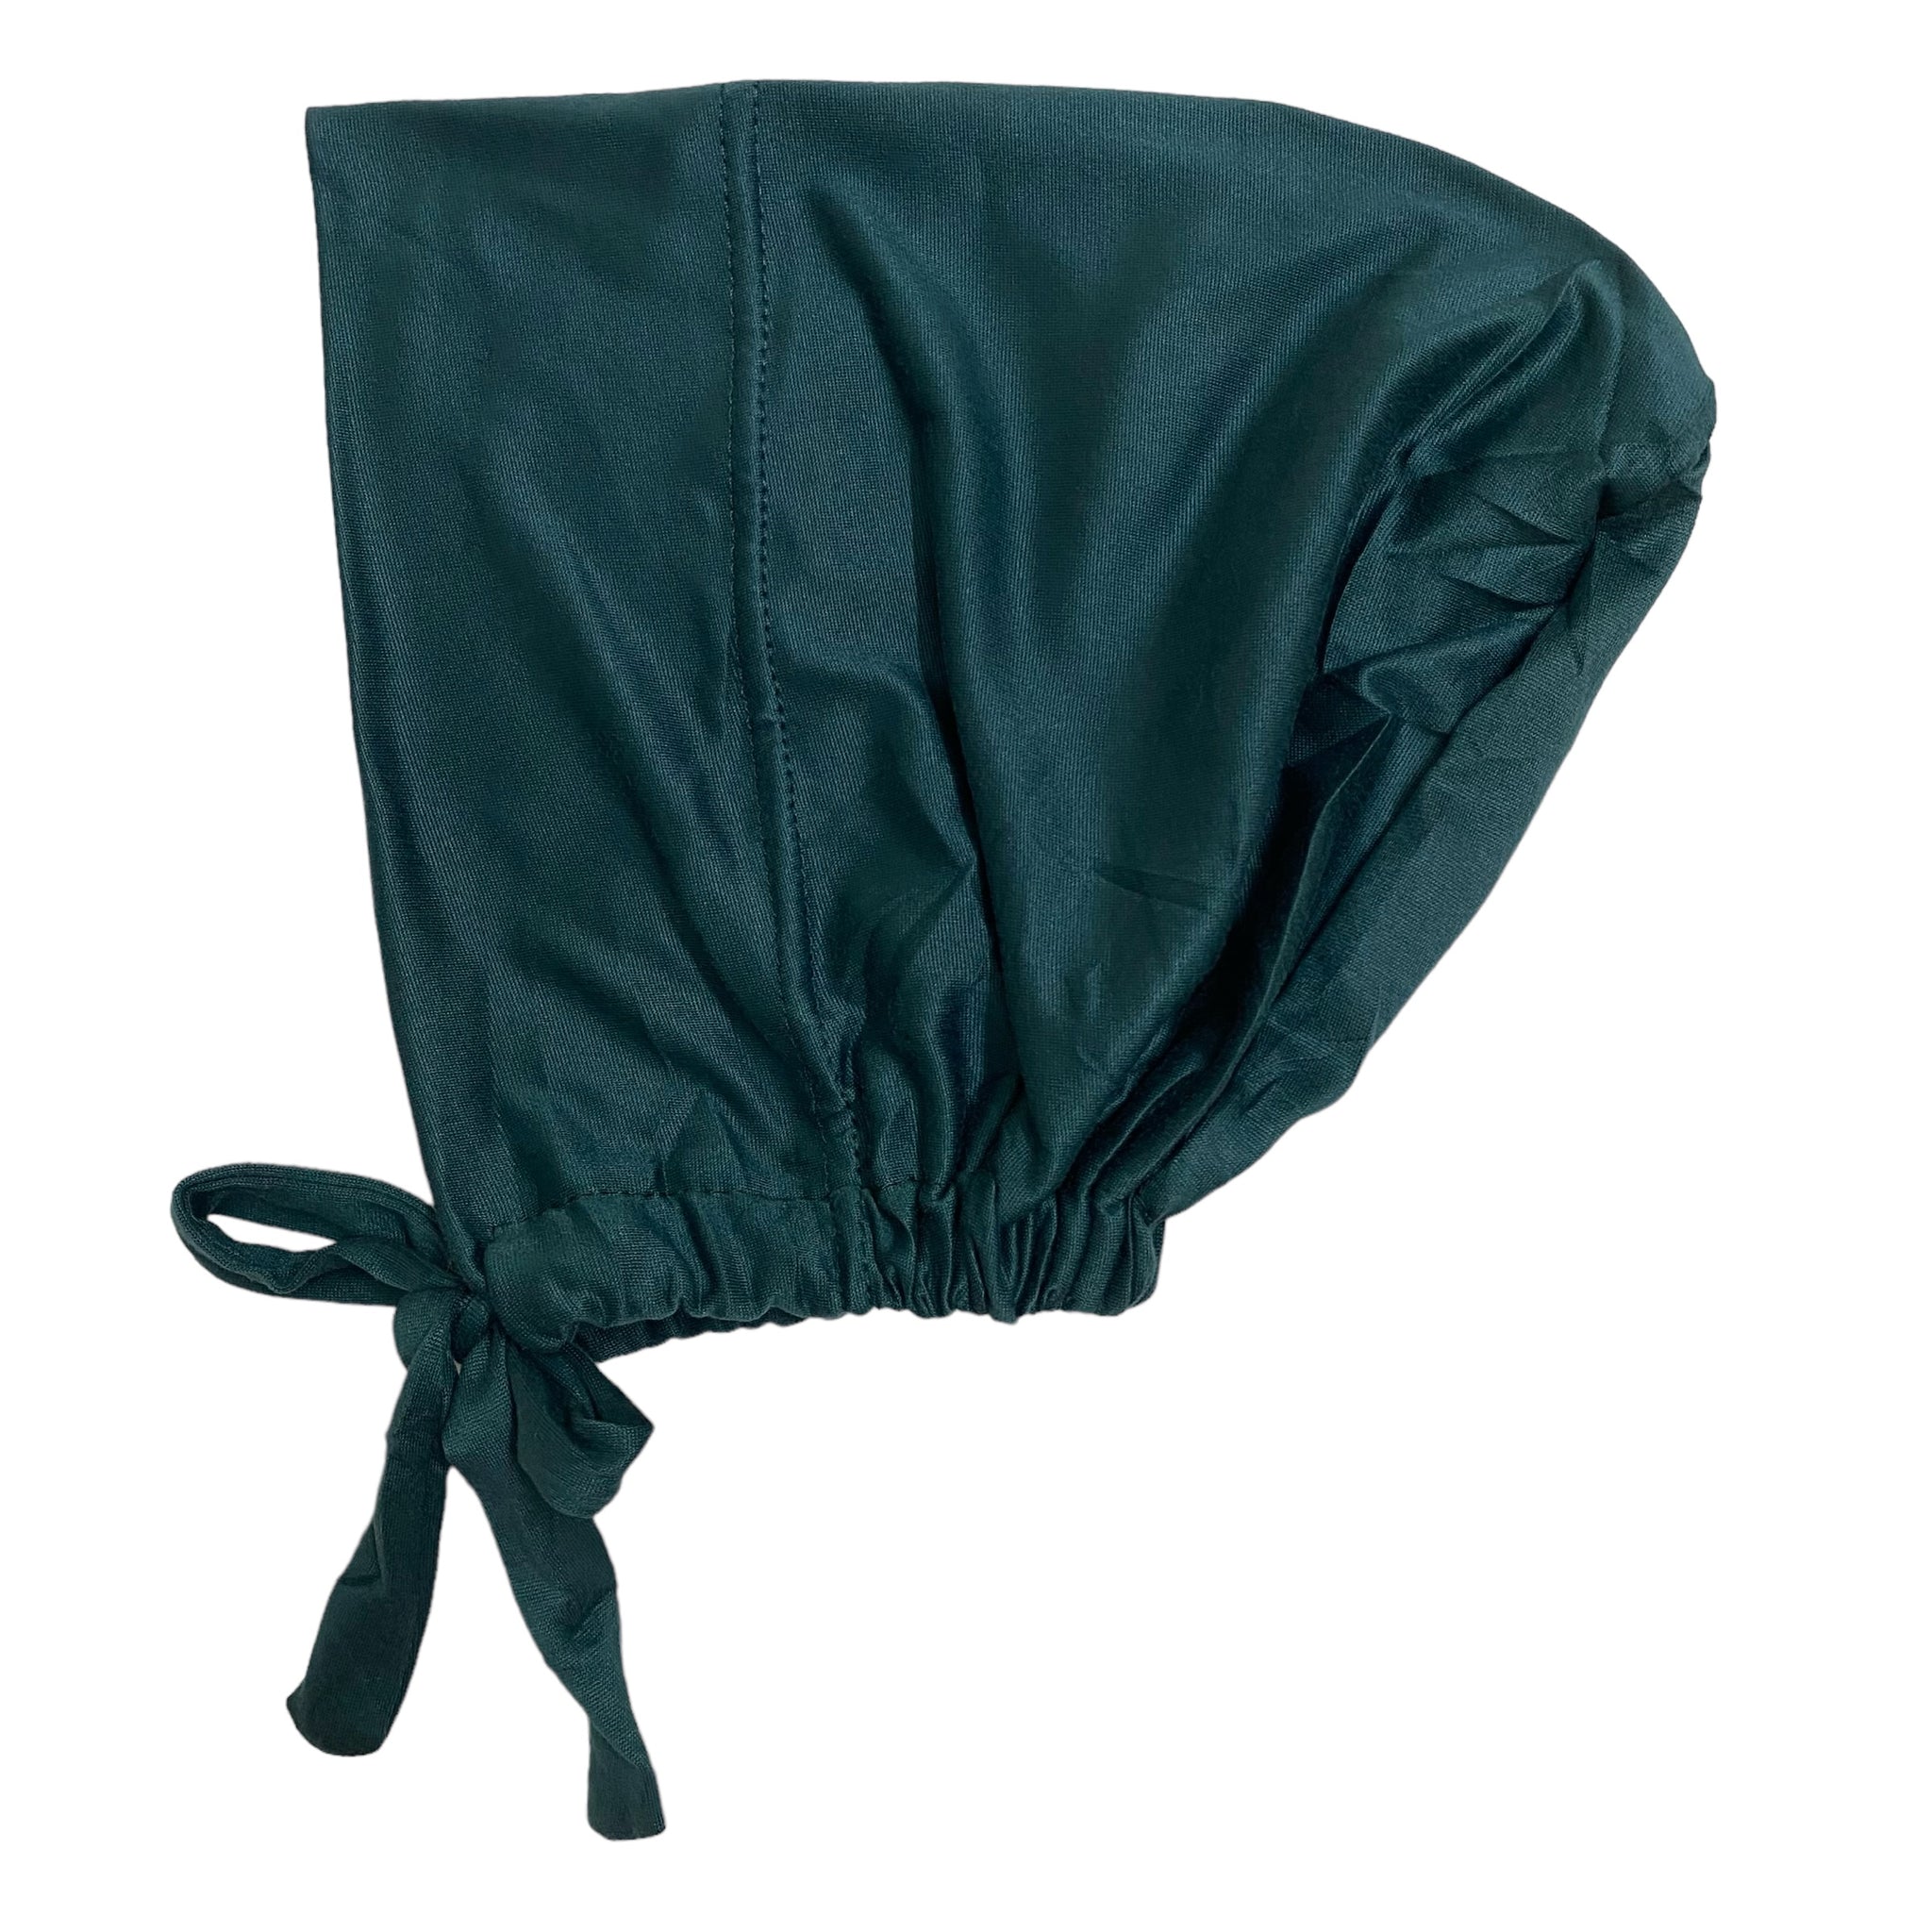 Imported Tie back Full Covered Hijab Cap – Peacock